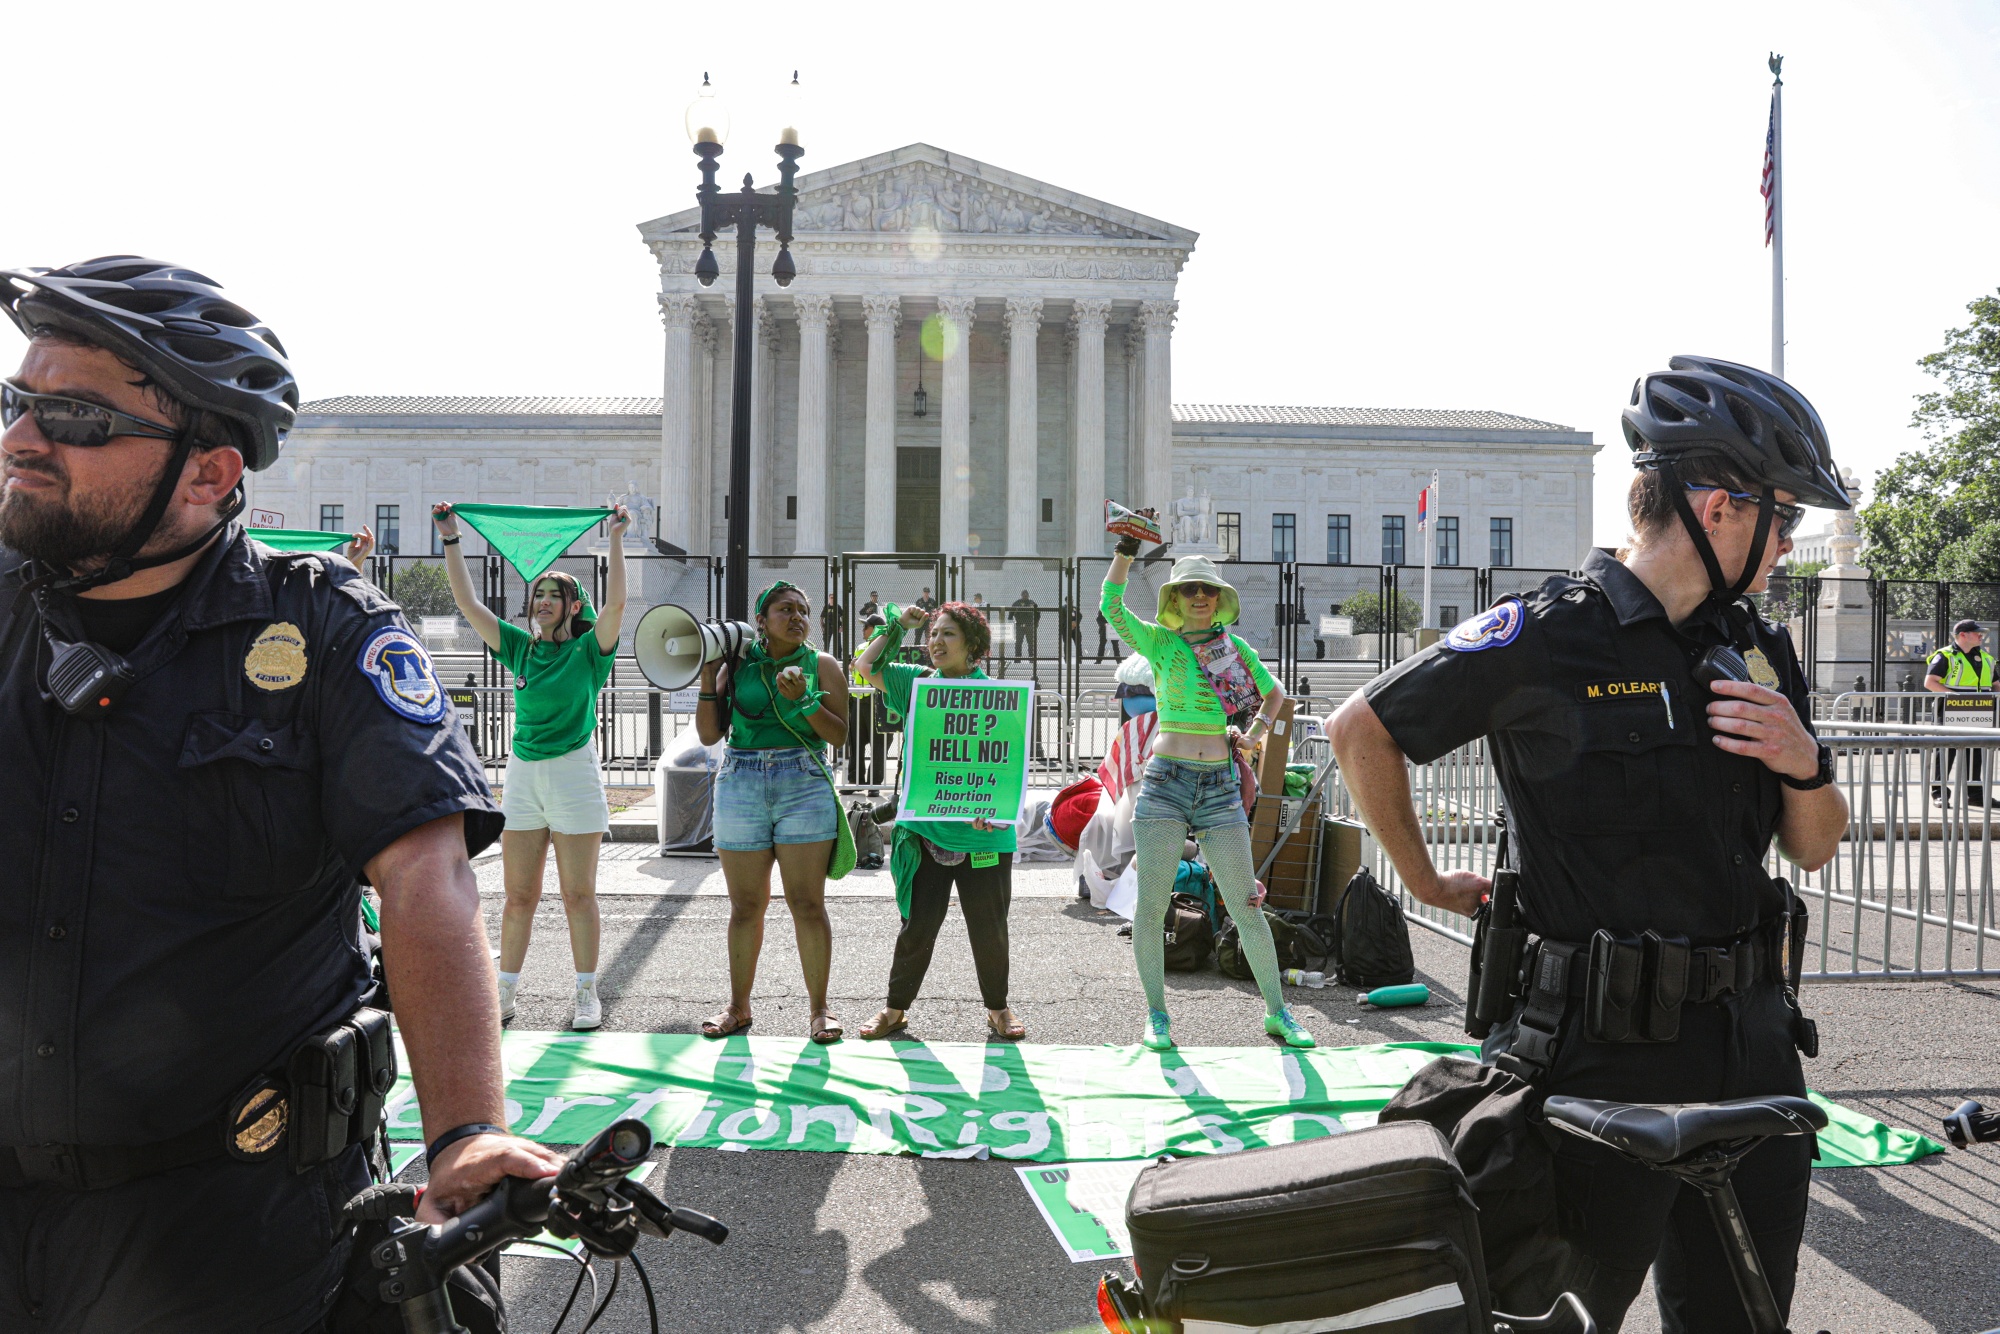 Pro-abortion protesters during a demonstration outside the US Supreme Court in Washington, D.C. on&nbsp;June 13.&nbsp;